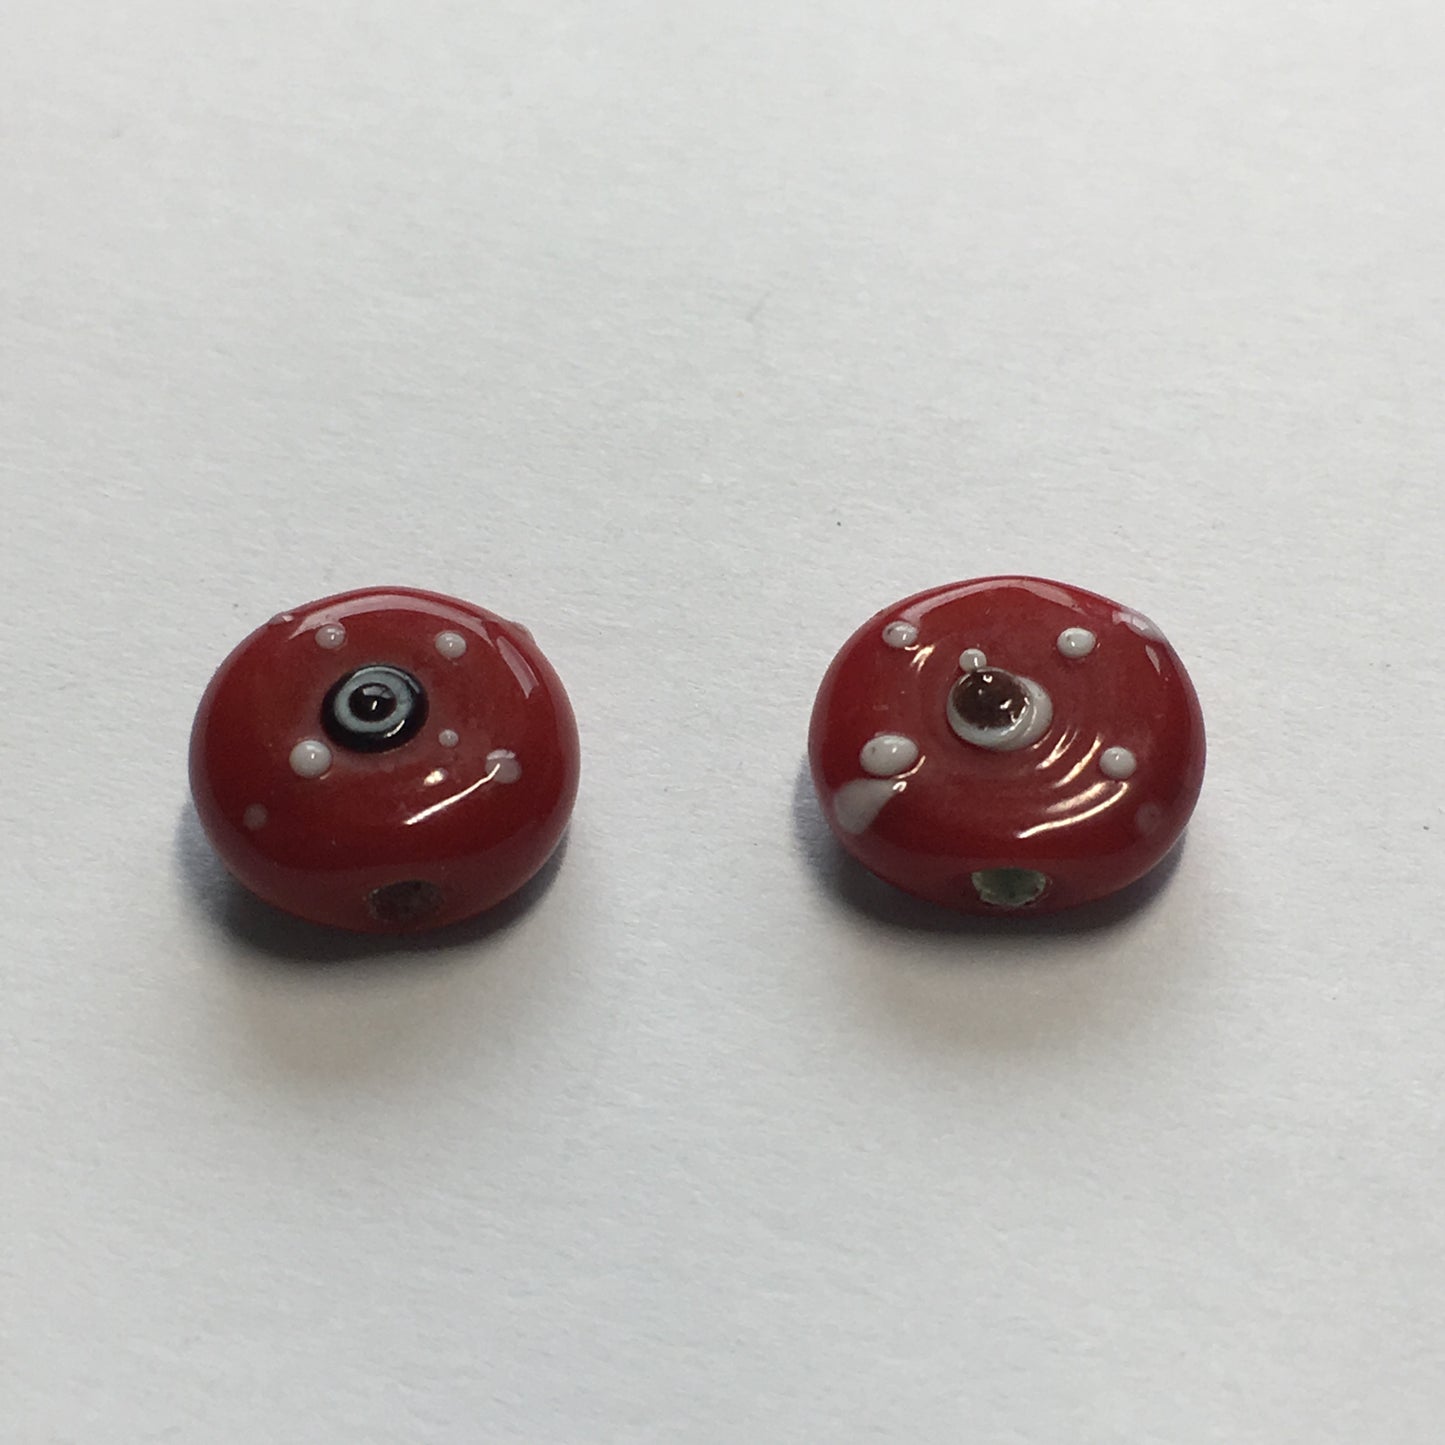 Opaque Red Lampwork Glass Coin Beads, 10 mm, 2 Beads